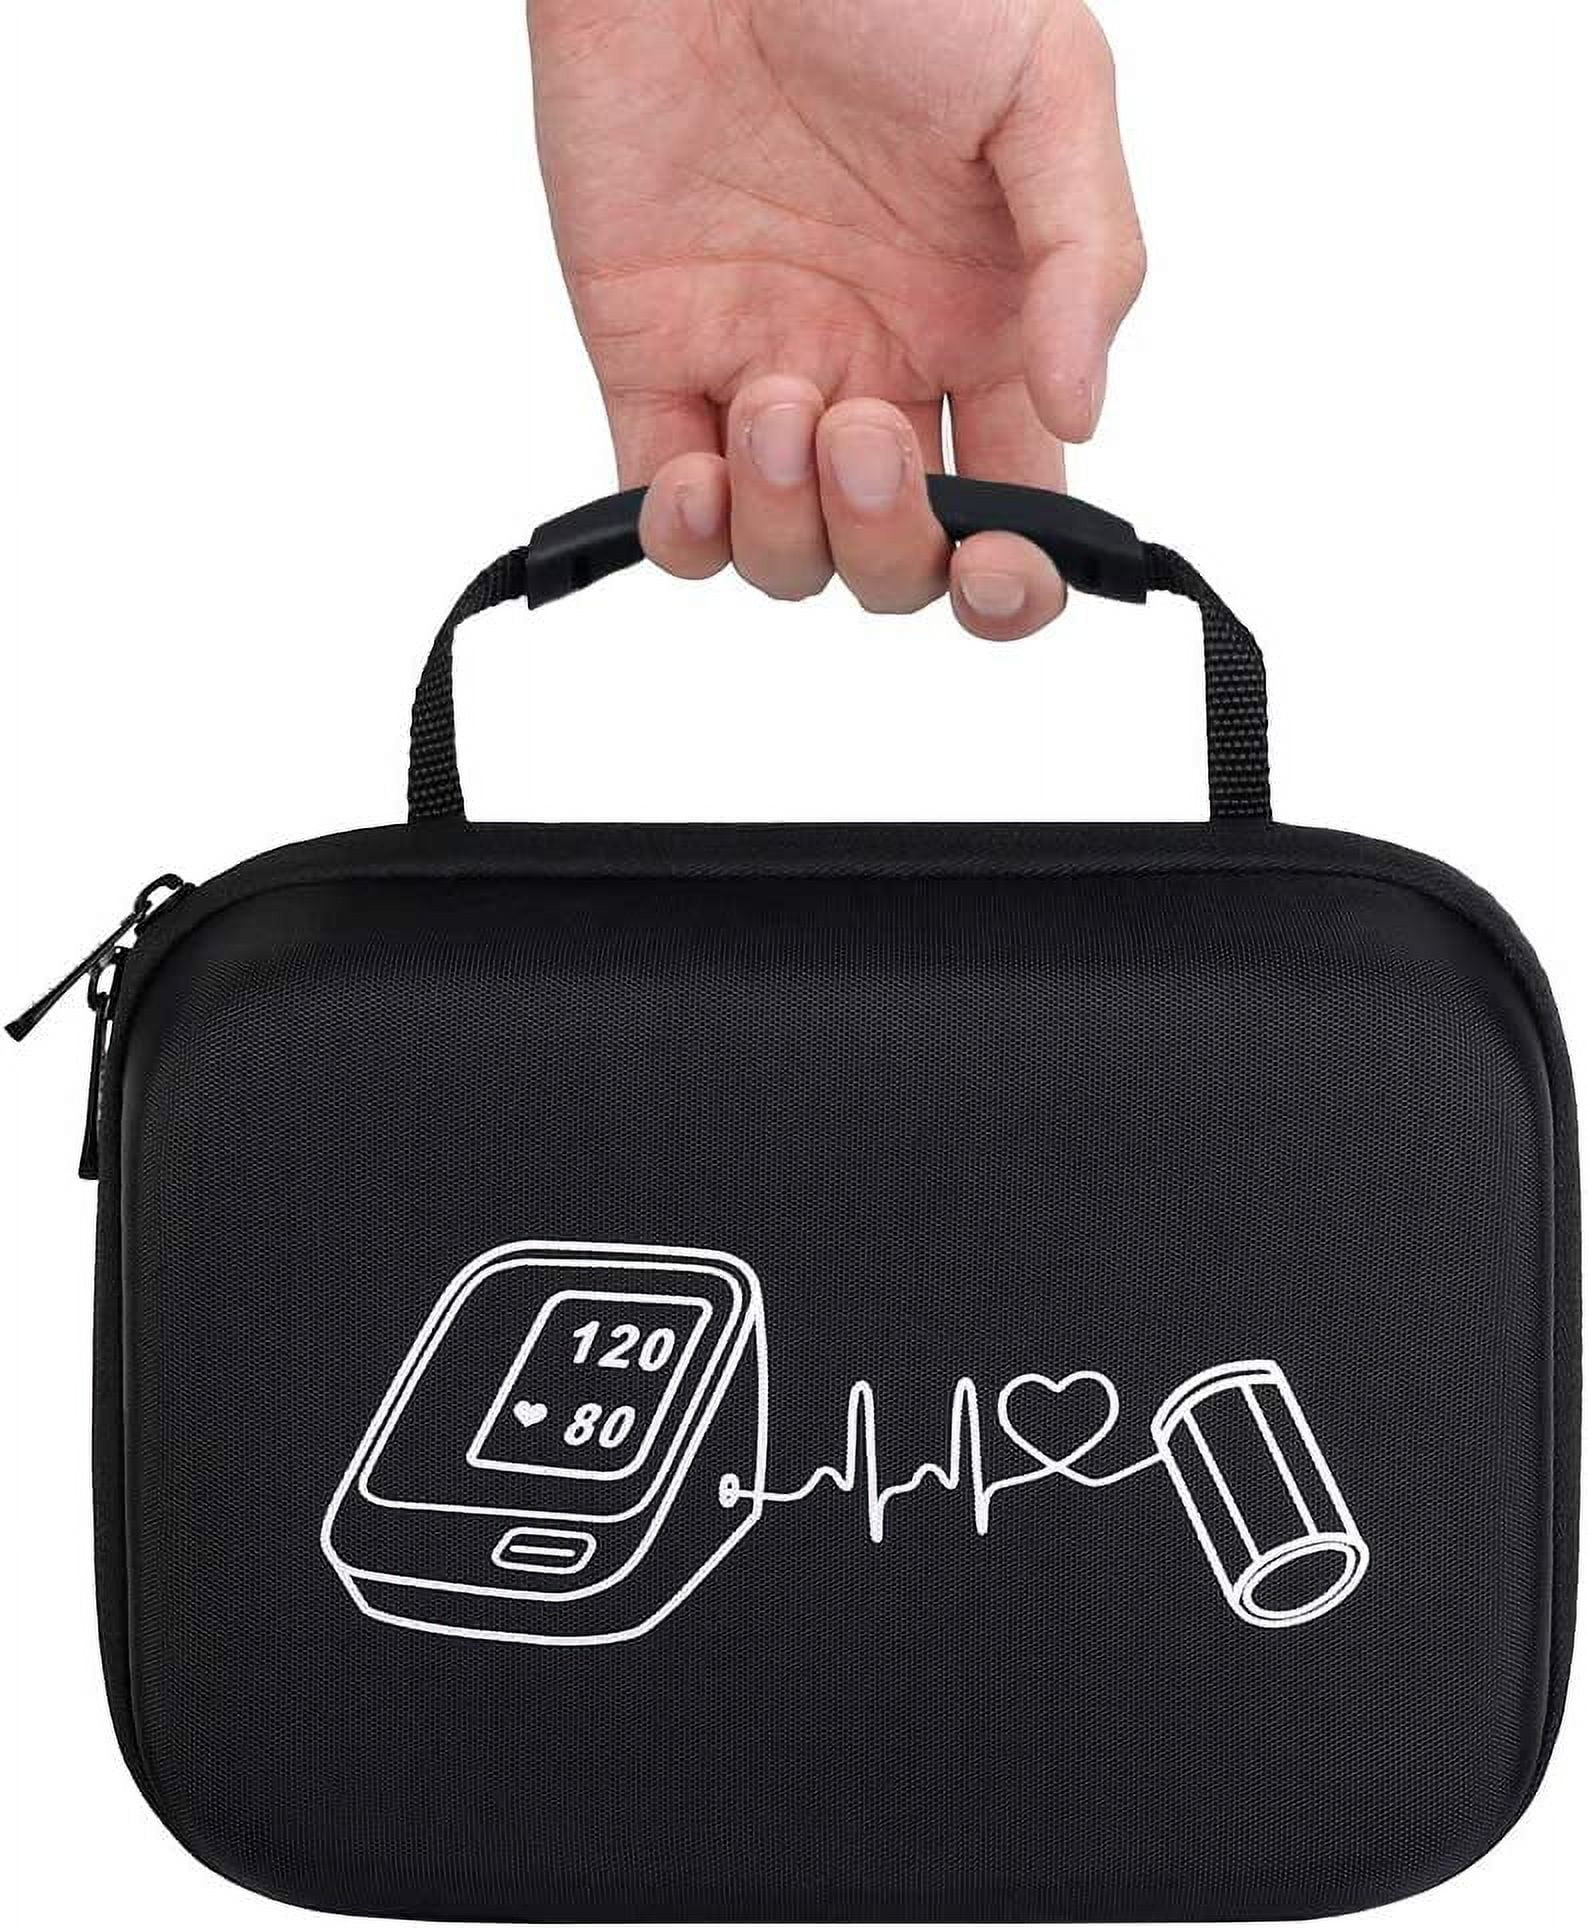 BOVKE Travel Carrying Case for Omron Platinum Blood Pressure Monitor BP5450  BP5350 with Upper Arm Cuff, OMRON Gold Digital Bluetooth Blood Pressure